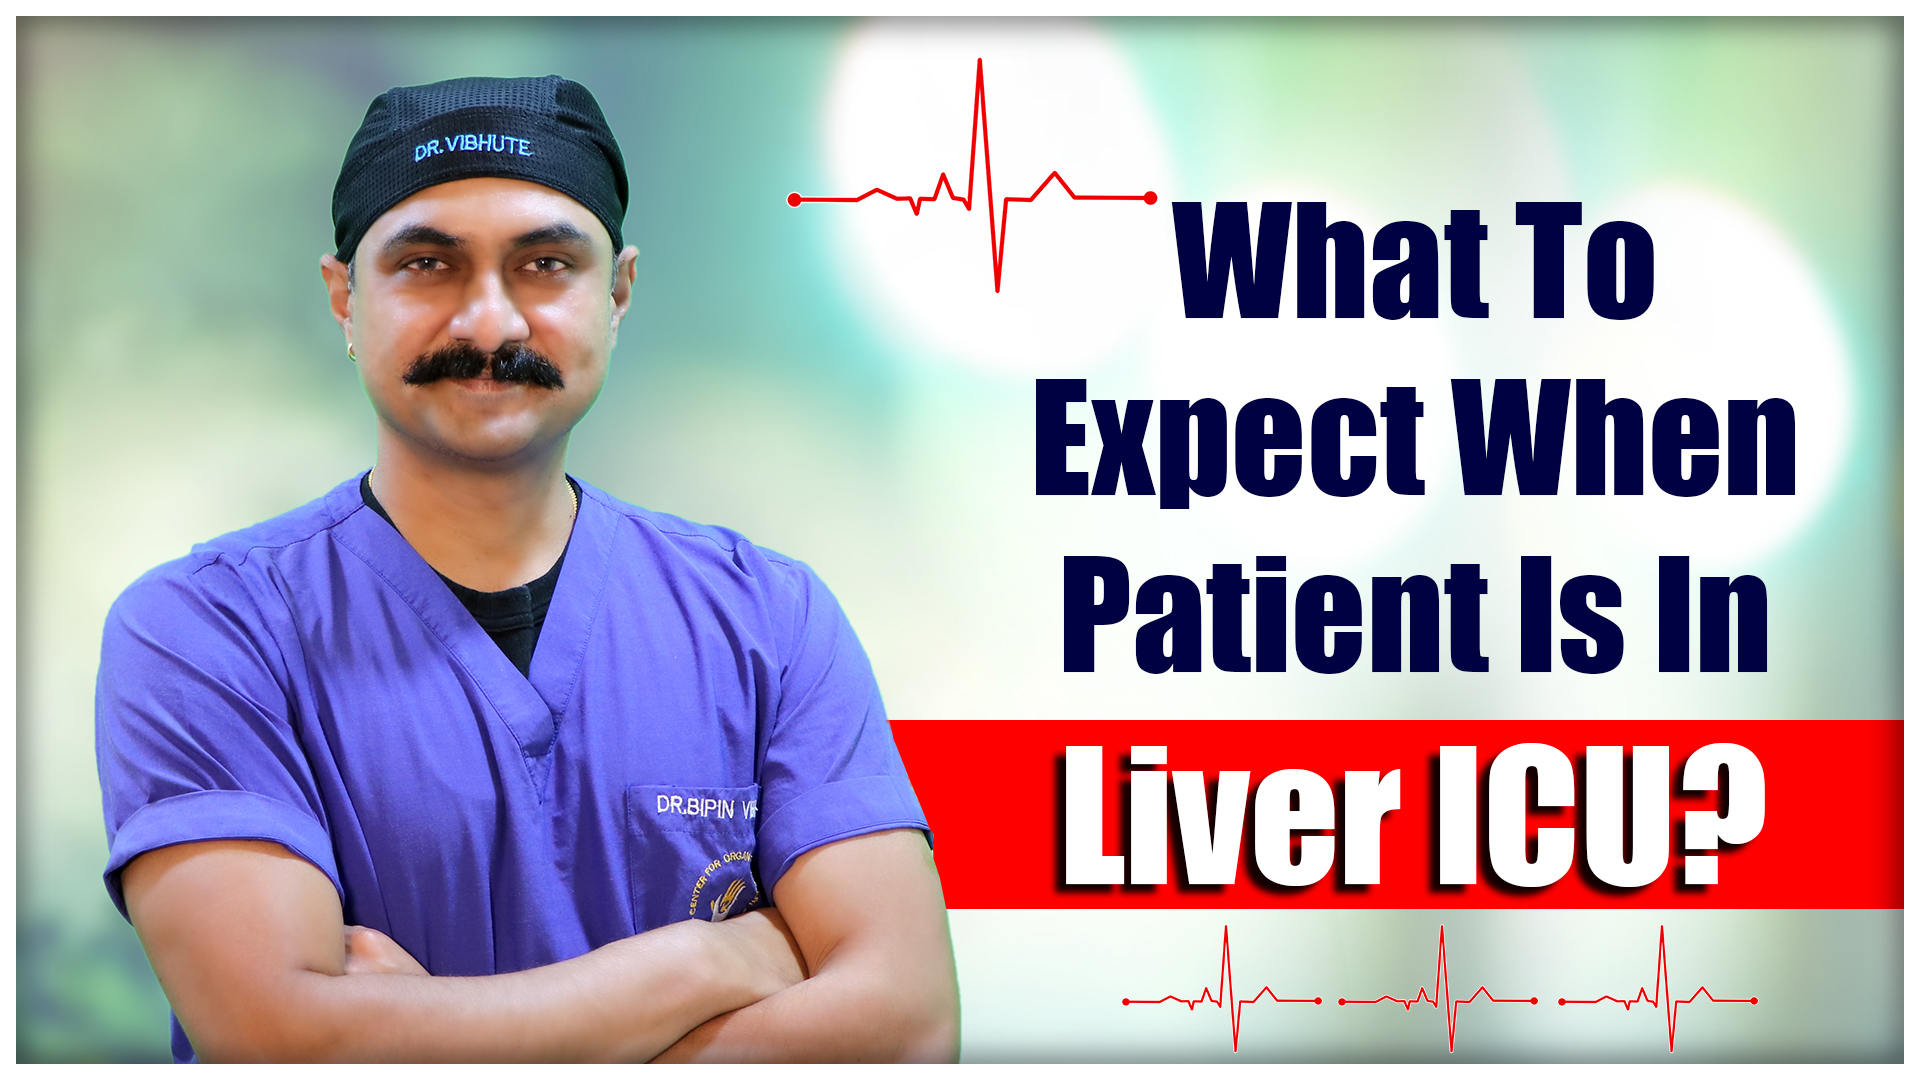 What to Expect When Patient is in Liver ICU